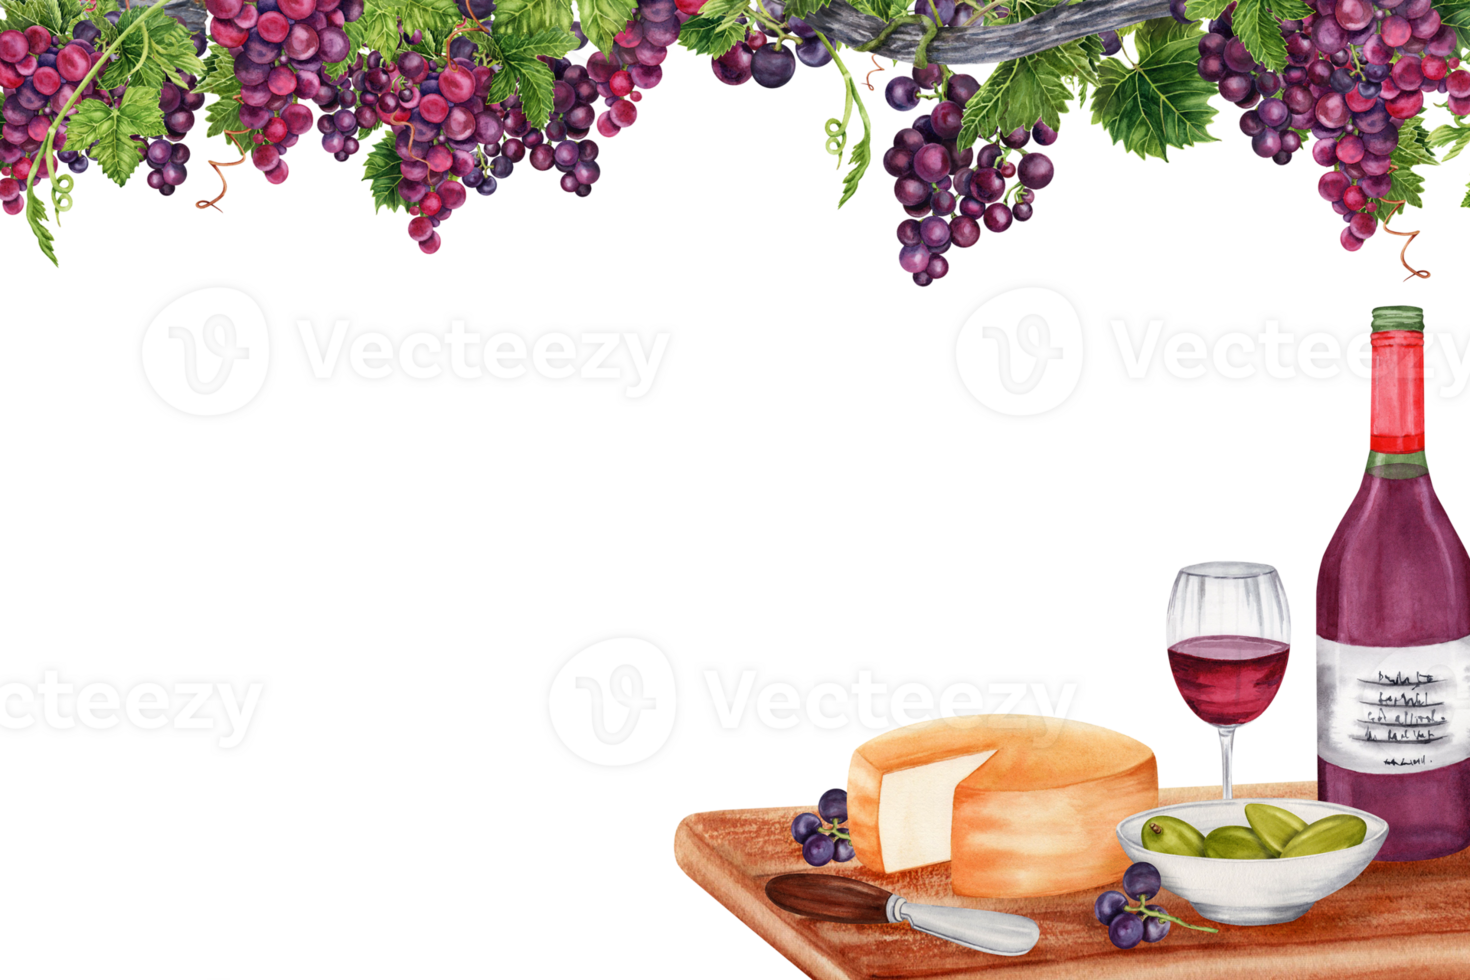 Postcard design with cheese, wine glass, bottle, plate with green olives, knife on wooden board under bunches of grapes on vine branch. Watercolor illustration isolated on transparent background. png